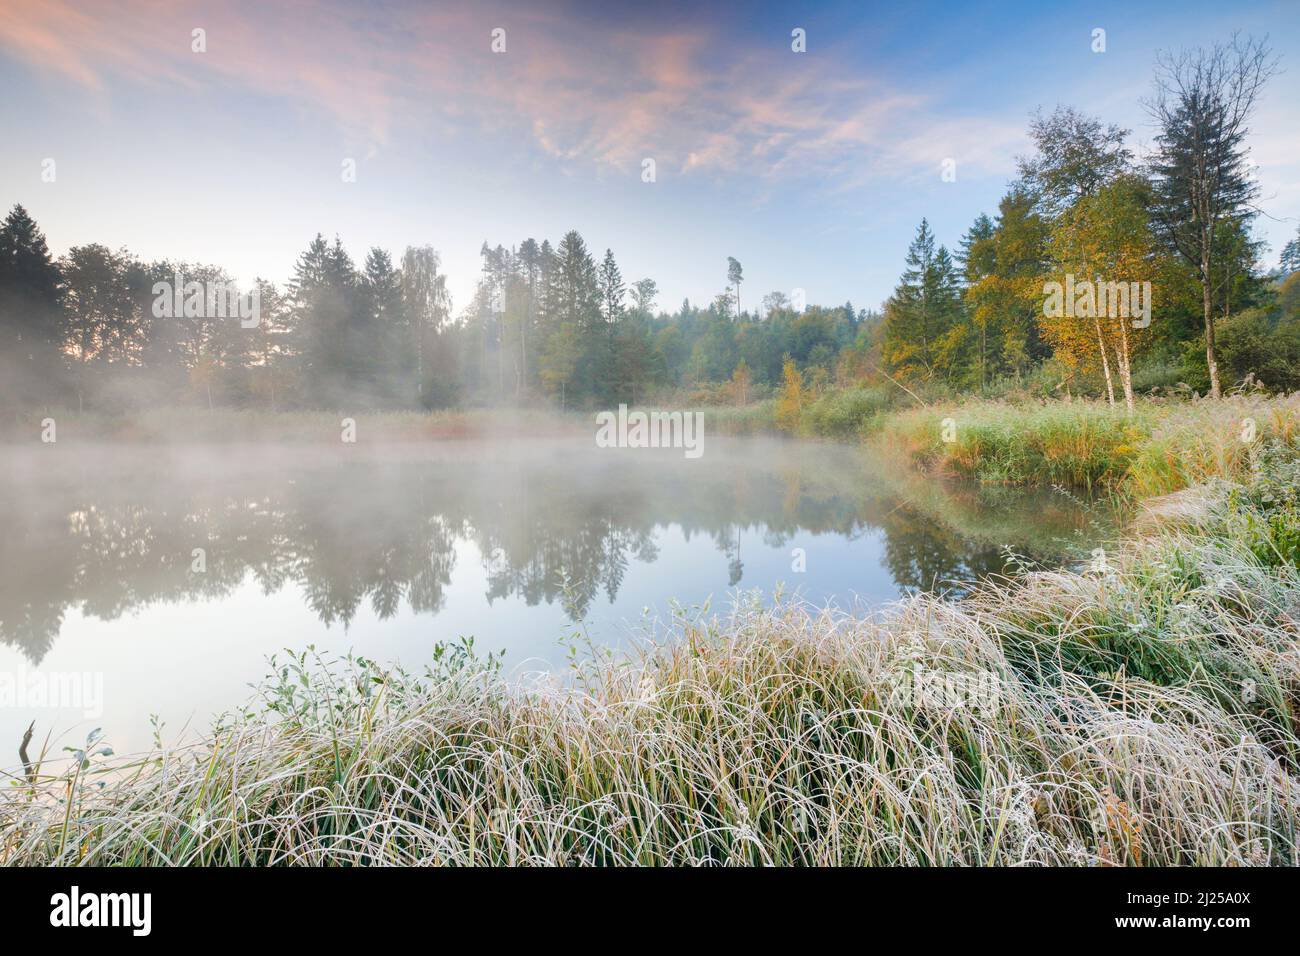 Autumnal morning mood at pond in nature reserve Wildert in Illnau. Hoarfrost covers vegetation in the foreground and fog hovers over the water. Canton Zurich, Switzerland Stock Photo